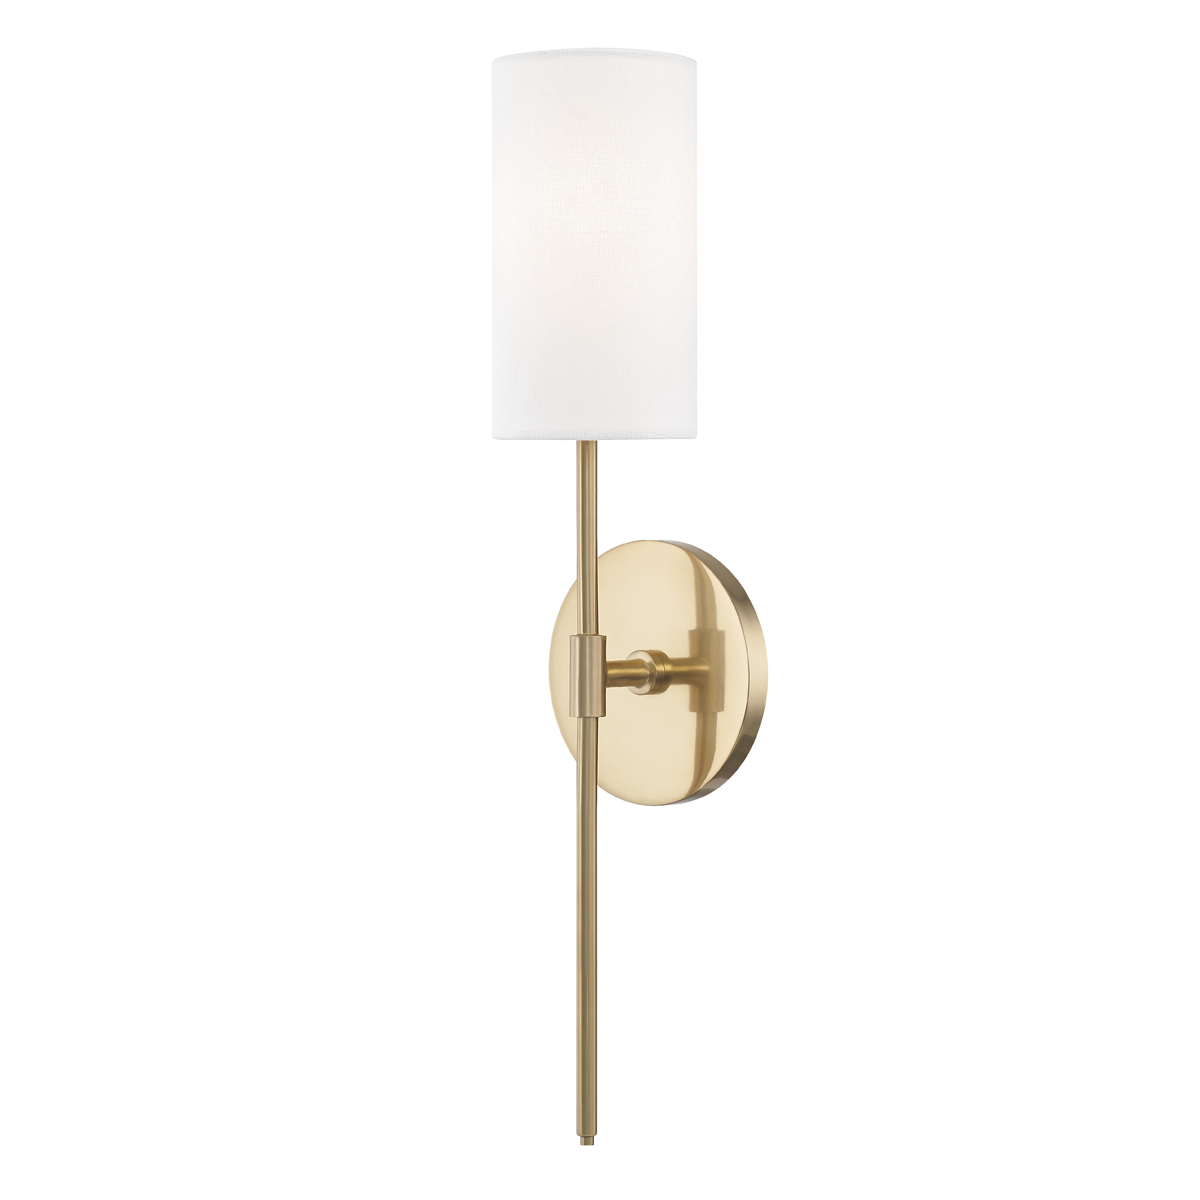 Mitzi Olivia 1-Light Aged Brass Wall Sconce with White Linen Shade 